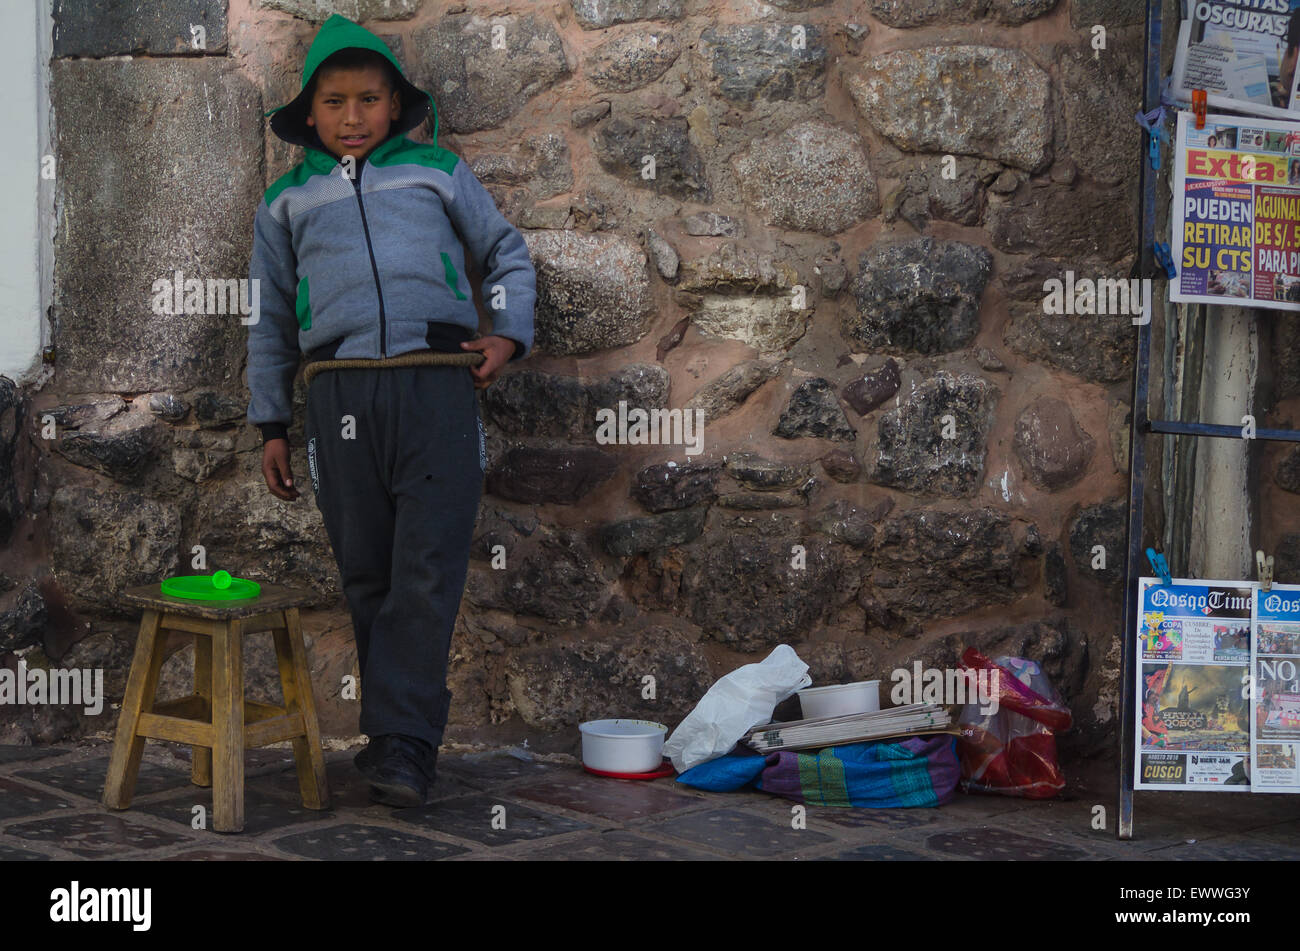 Boy standing against a stone wall in Cusco, Peru, selling items. Stock Photo